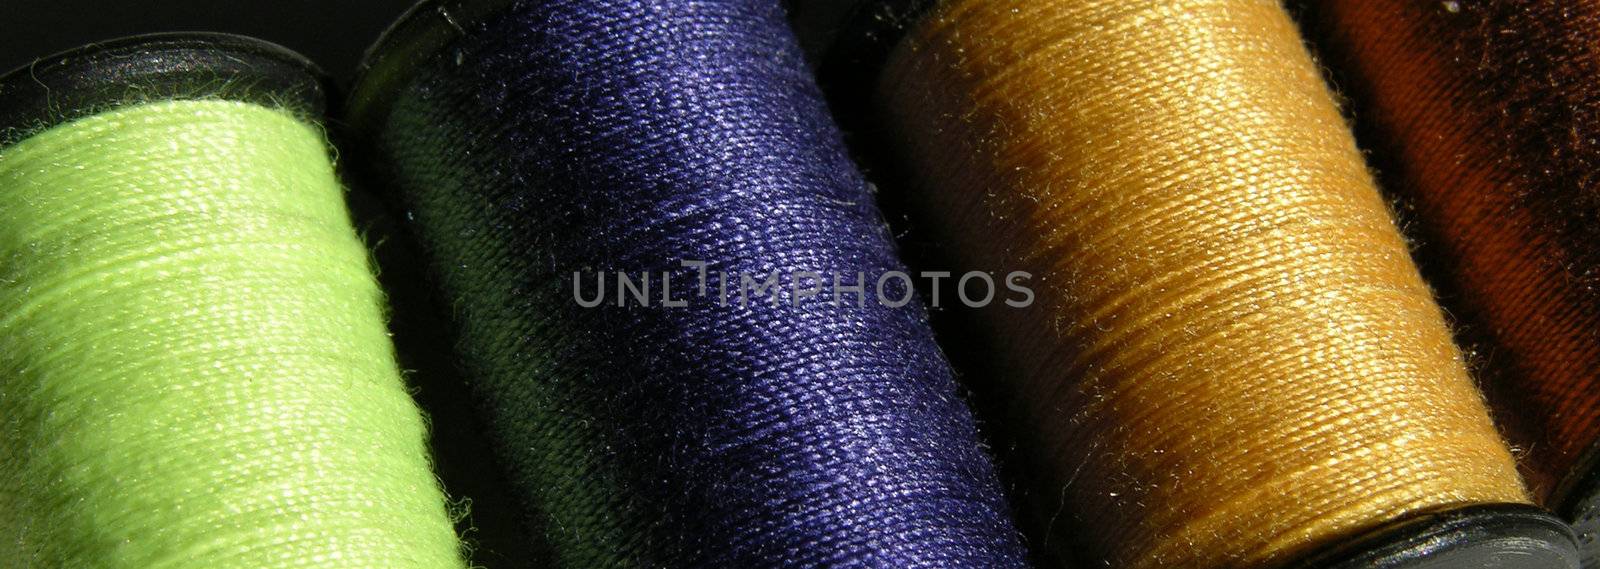 Four spools of thread seen closeup in different colors